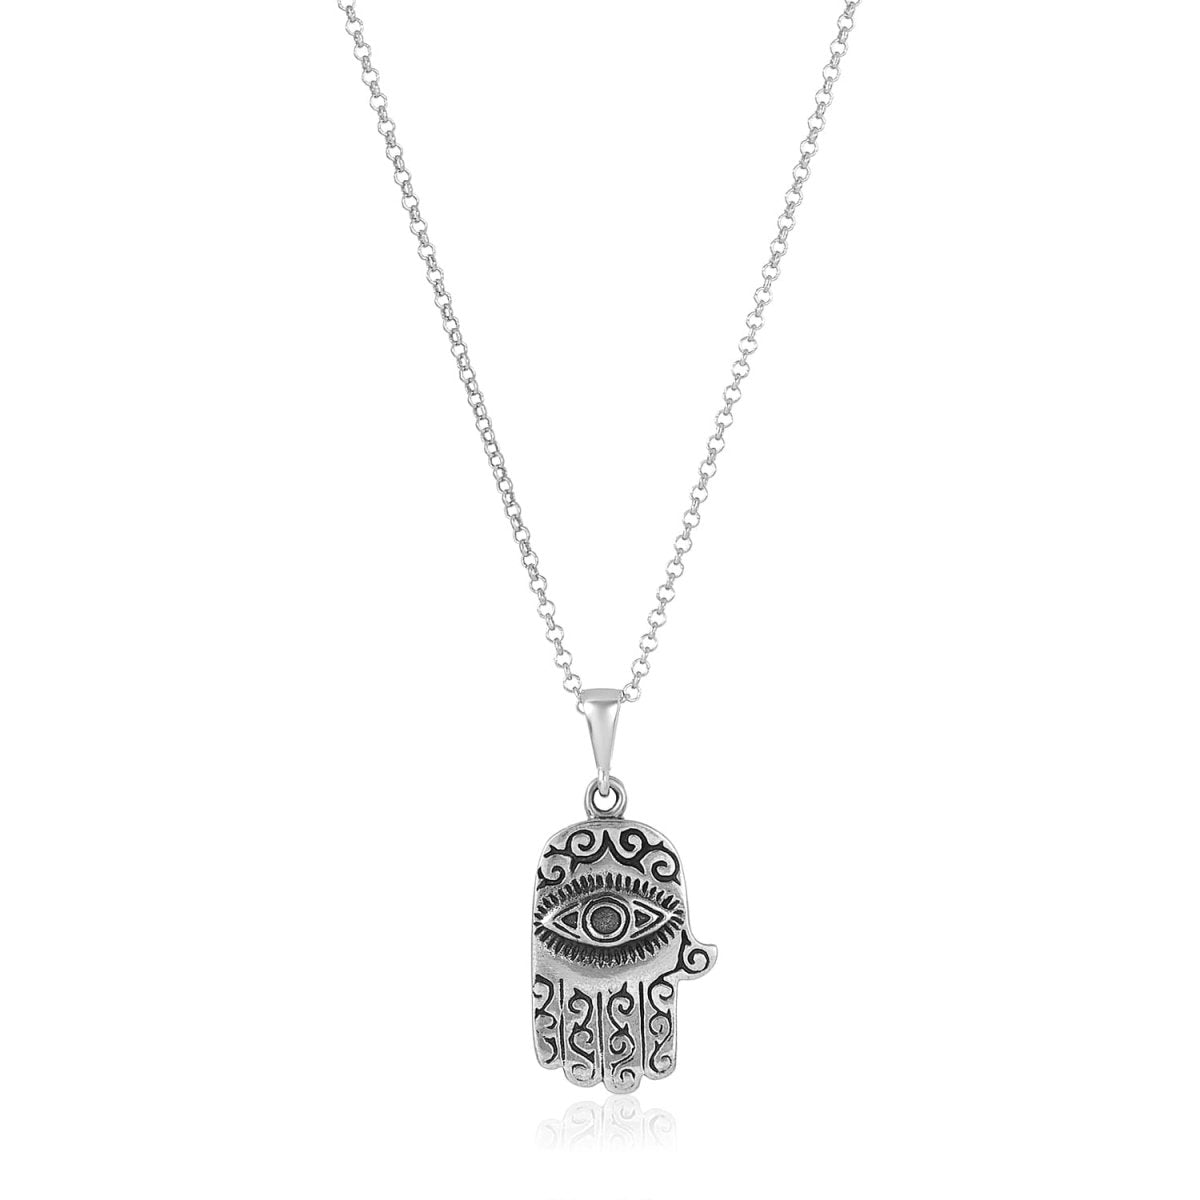 Hamsa Charm Necklace in Sterling Silver